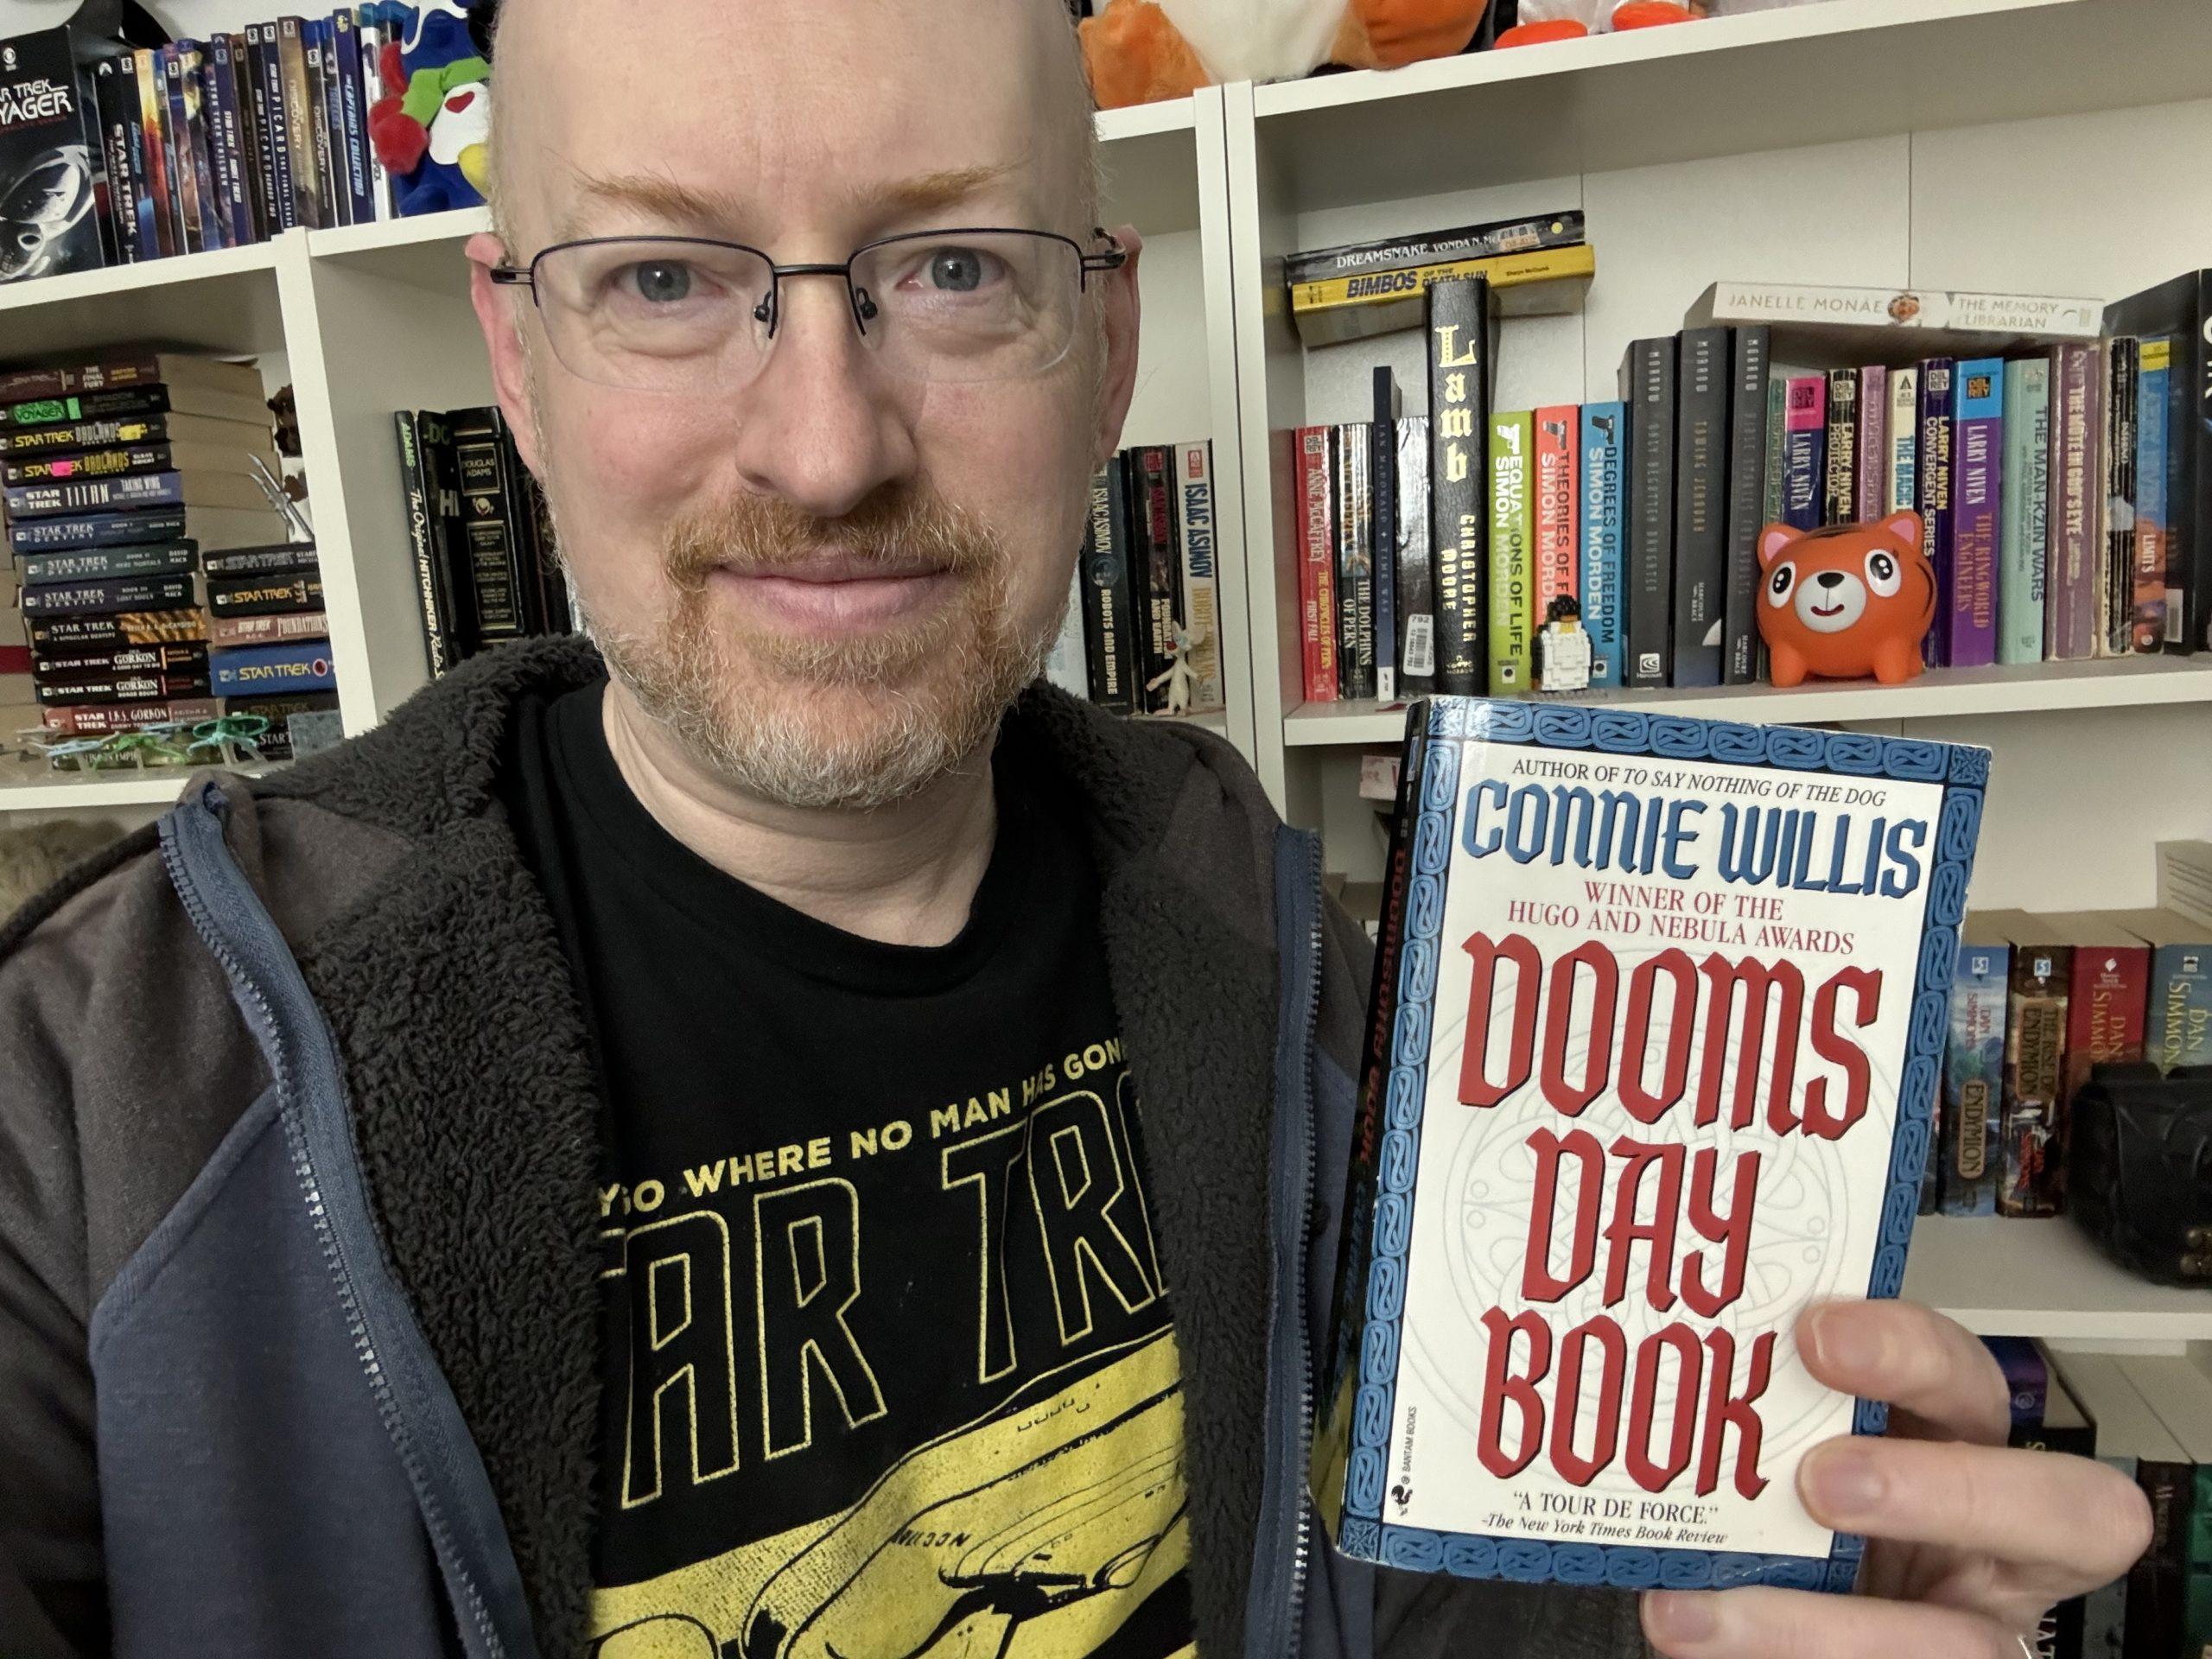 Me holding Doomsday Book